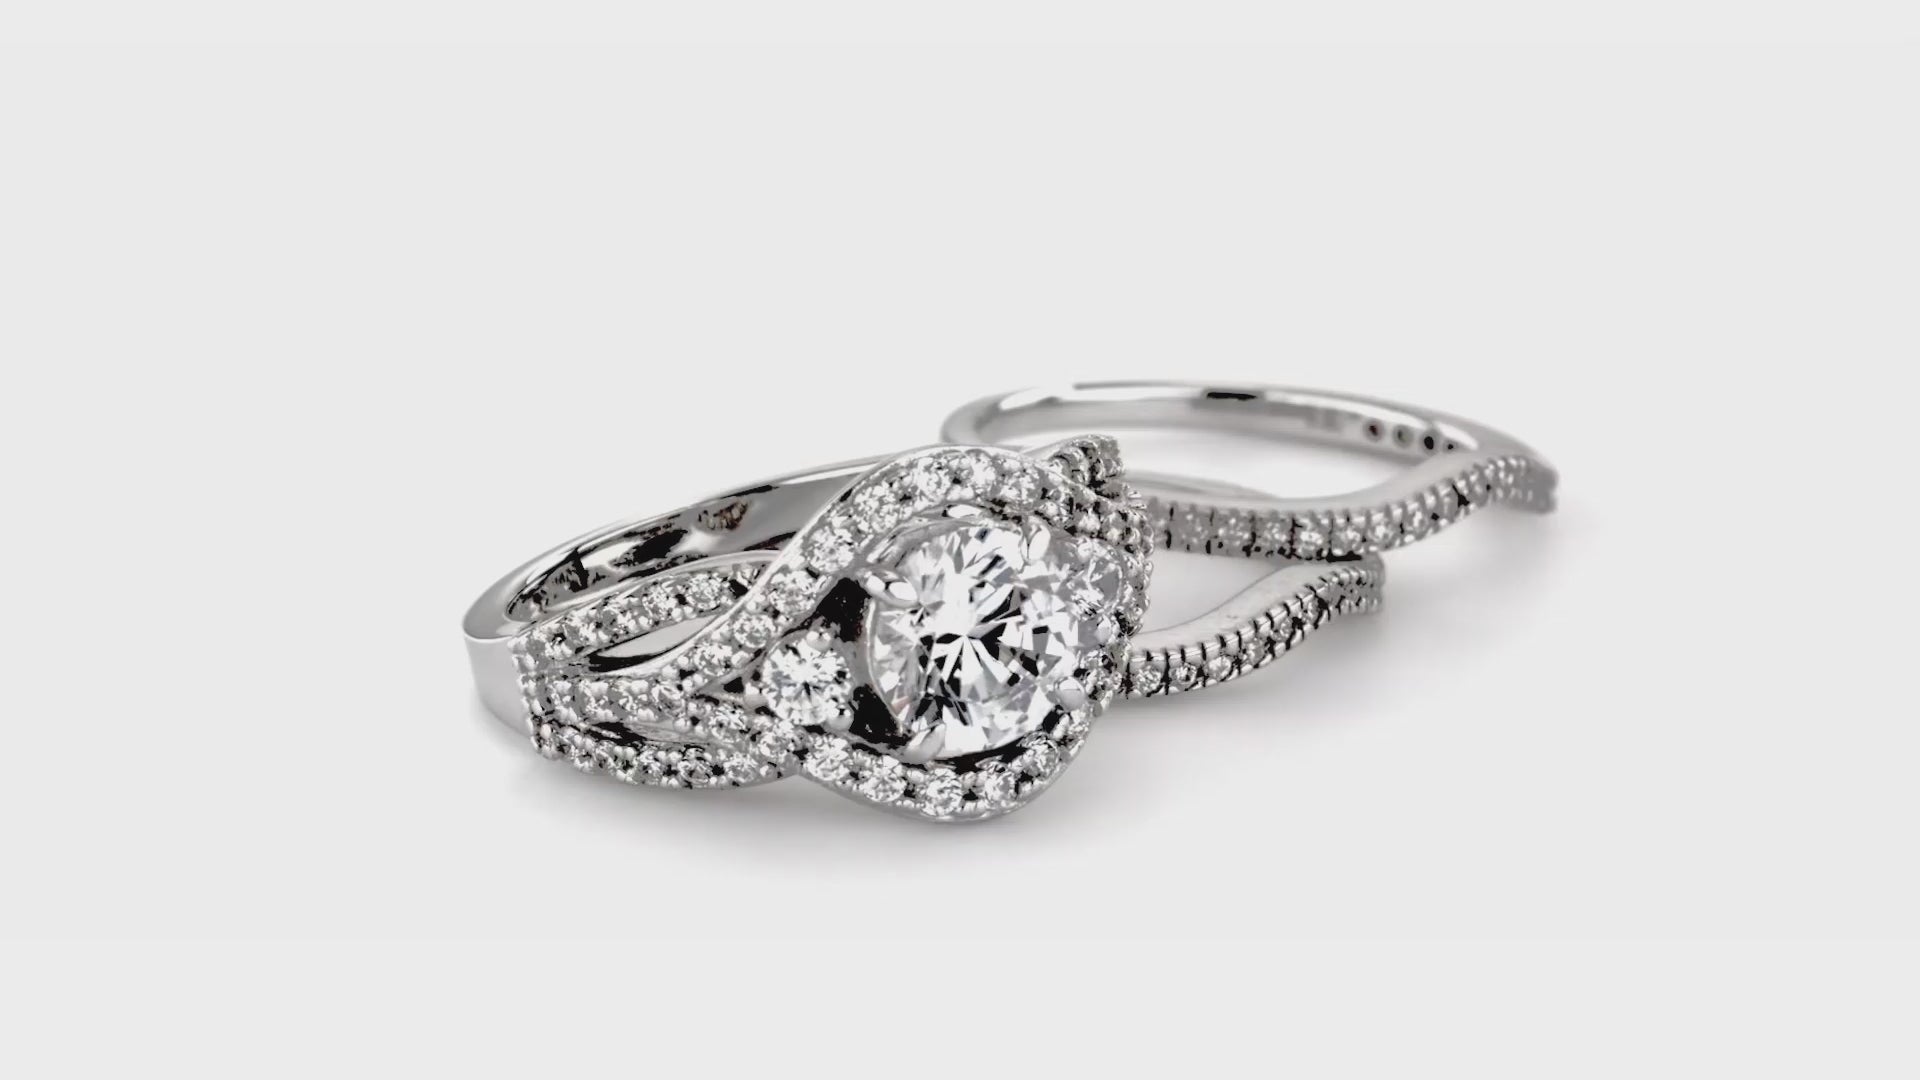 Video Contains 3-Stone Round CZ Ring Set in Sterling Silver. Style Number VR259-02